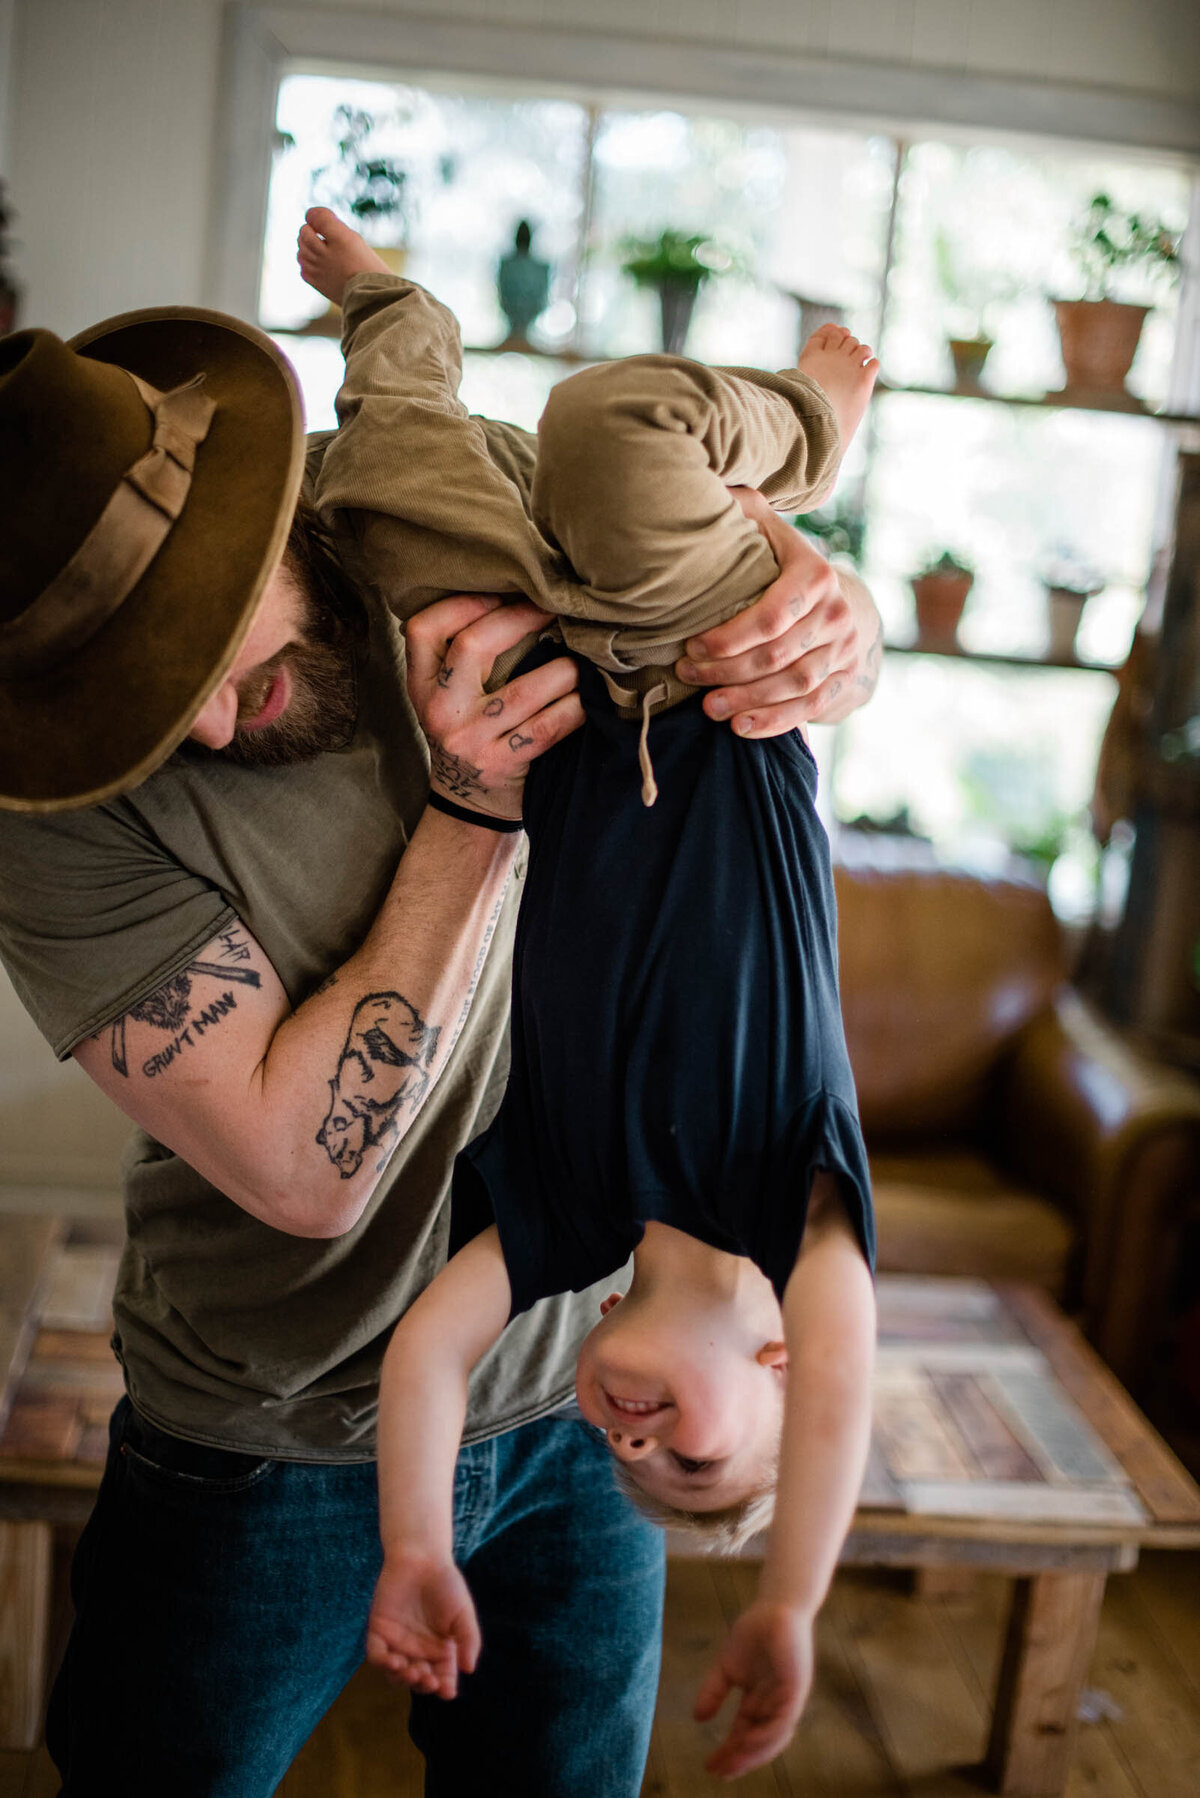 Father holds son upside down in their living room